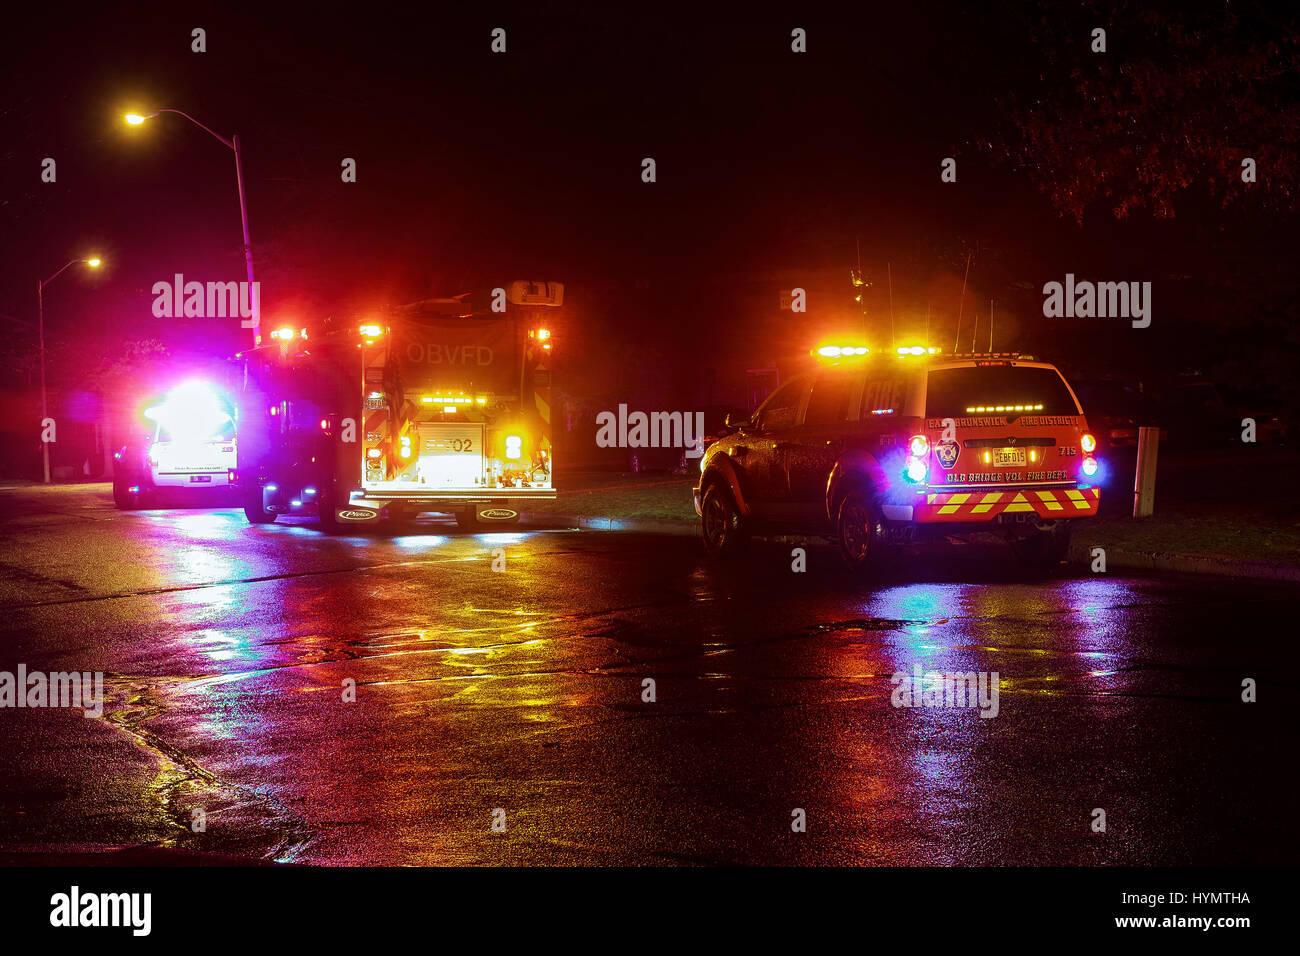 Sayreville NJ, Usa - Apryl 01, 2017 Fire trucks at night responding to a call. night fire truck Stock Photo